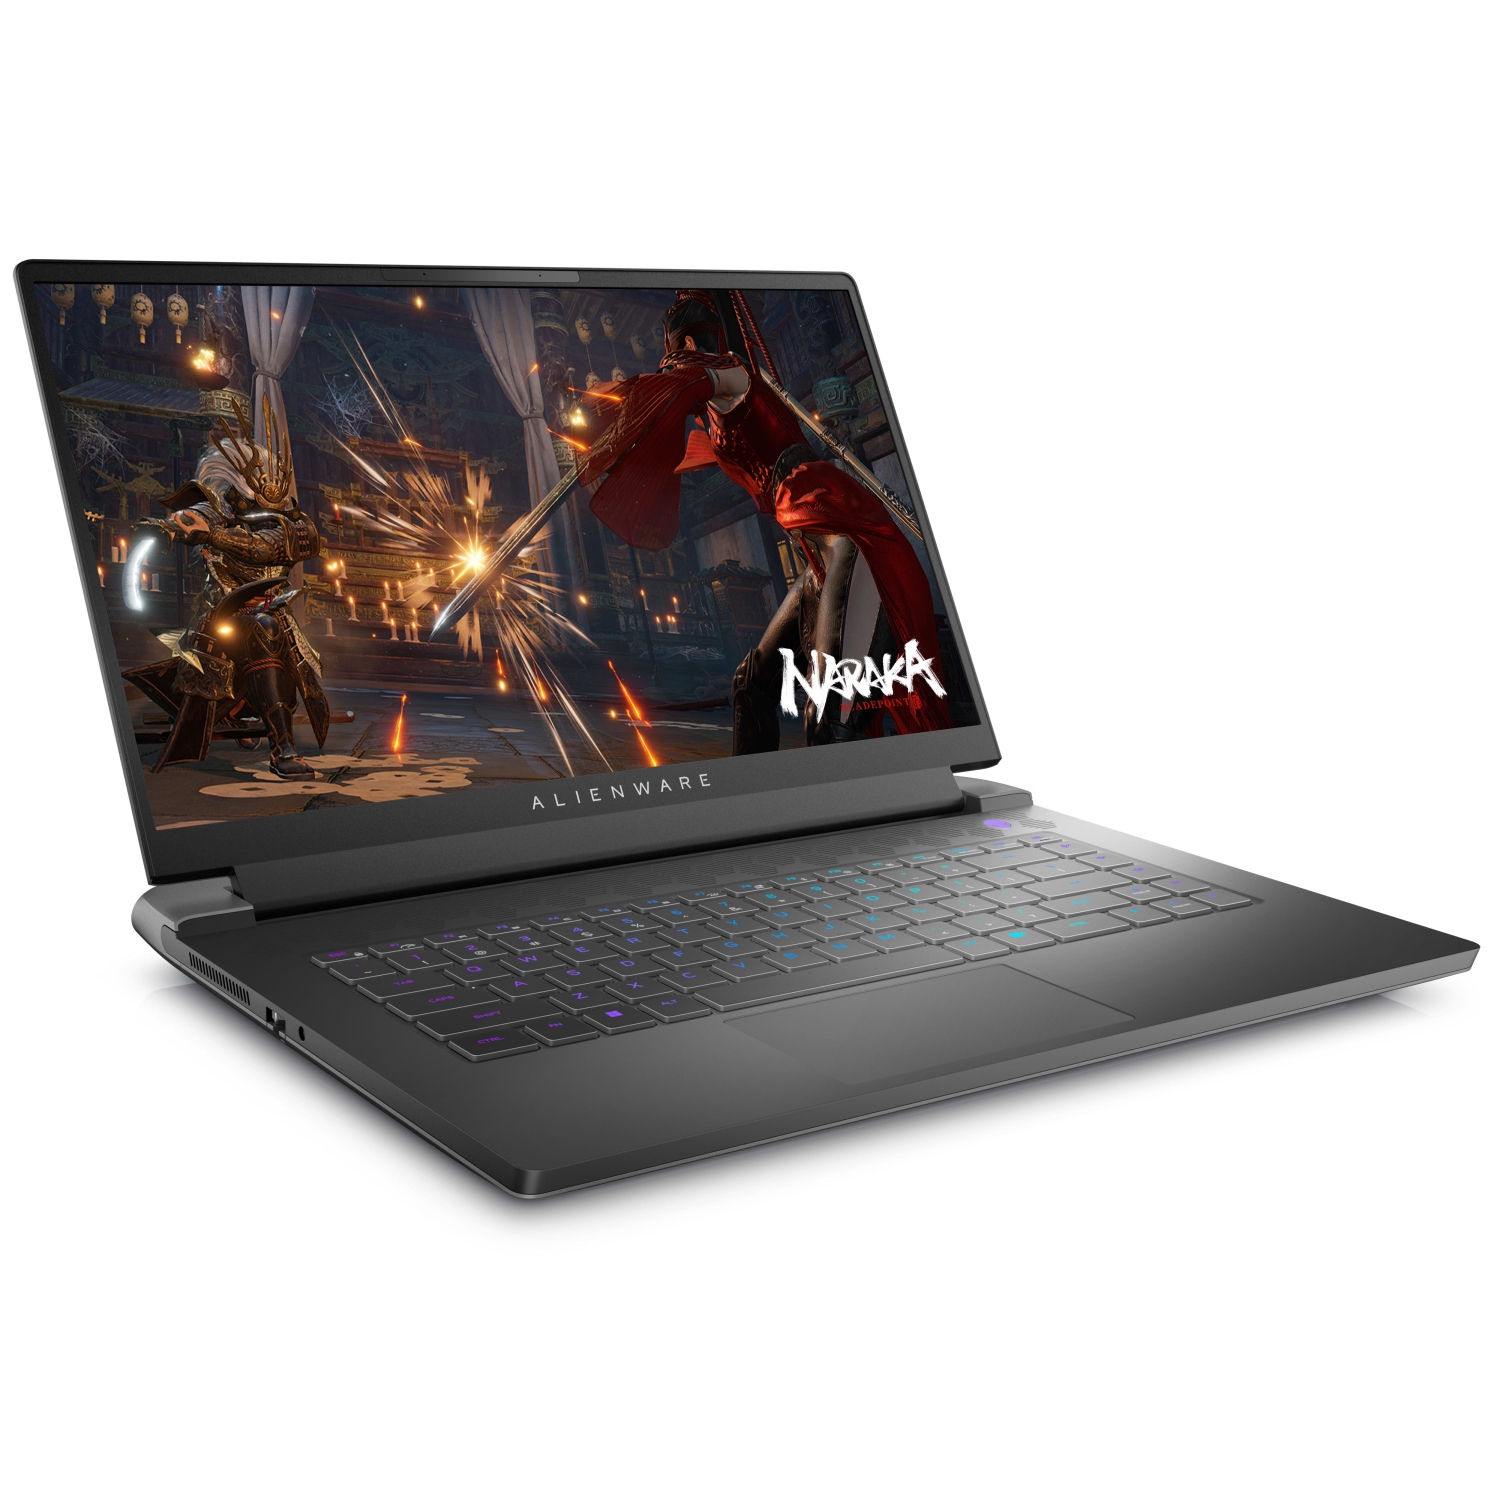 Refurbished (Excellent) – Dell Alienware m15 R7 Gaming Laptop (2022) | 15.6" FHD | Core i7 - 512GB SSD - 32GB RAM - 3080 Ti | 14 Cores @ 4.7 GHz - 12th Gen CPU - 16GB GDDR6X